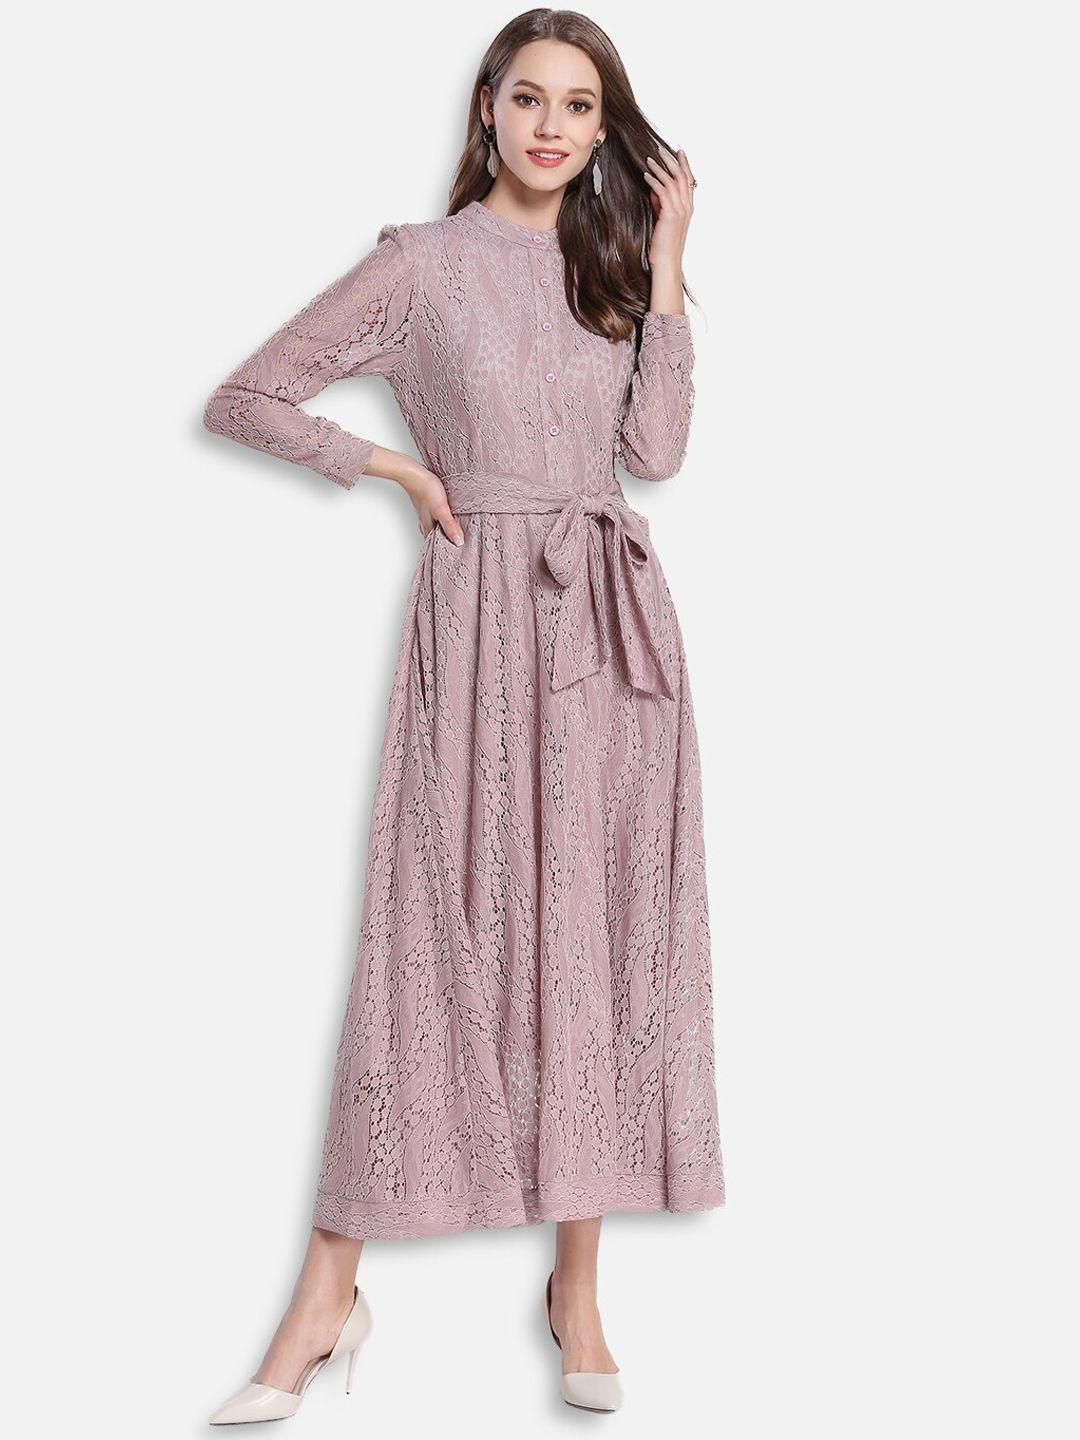 jc collection pink maxi dress